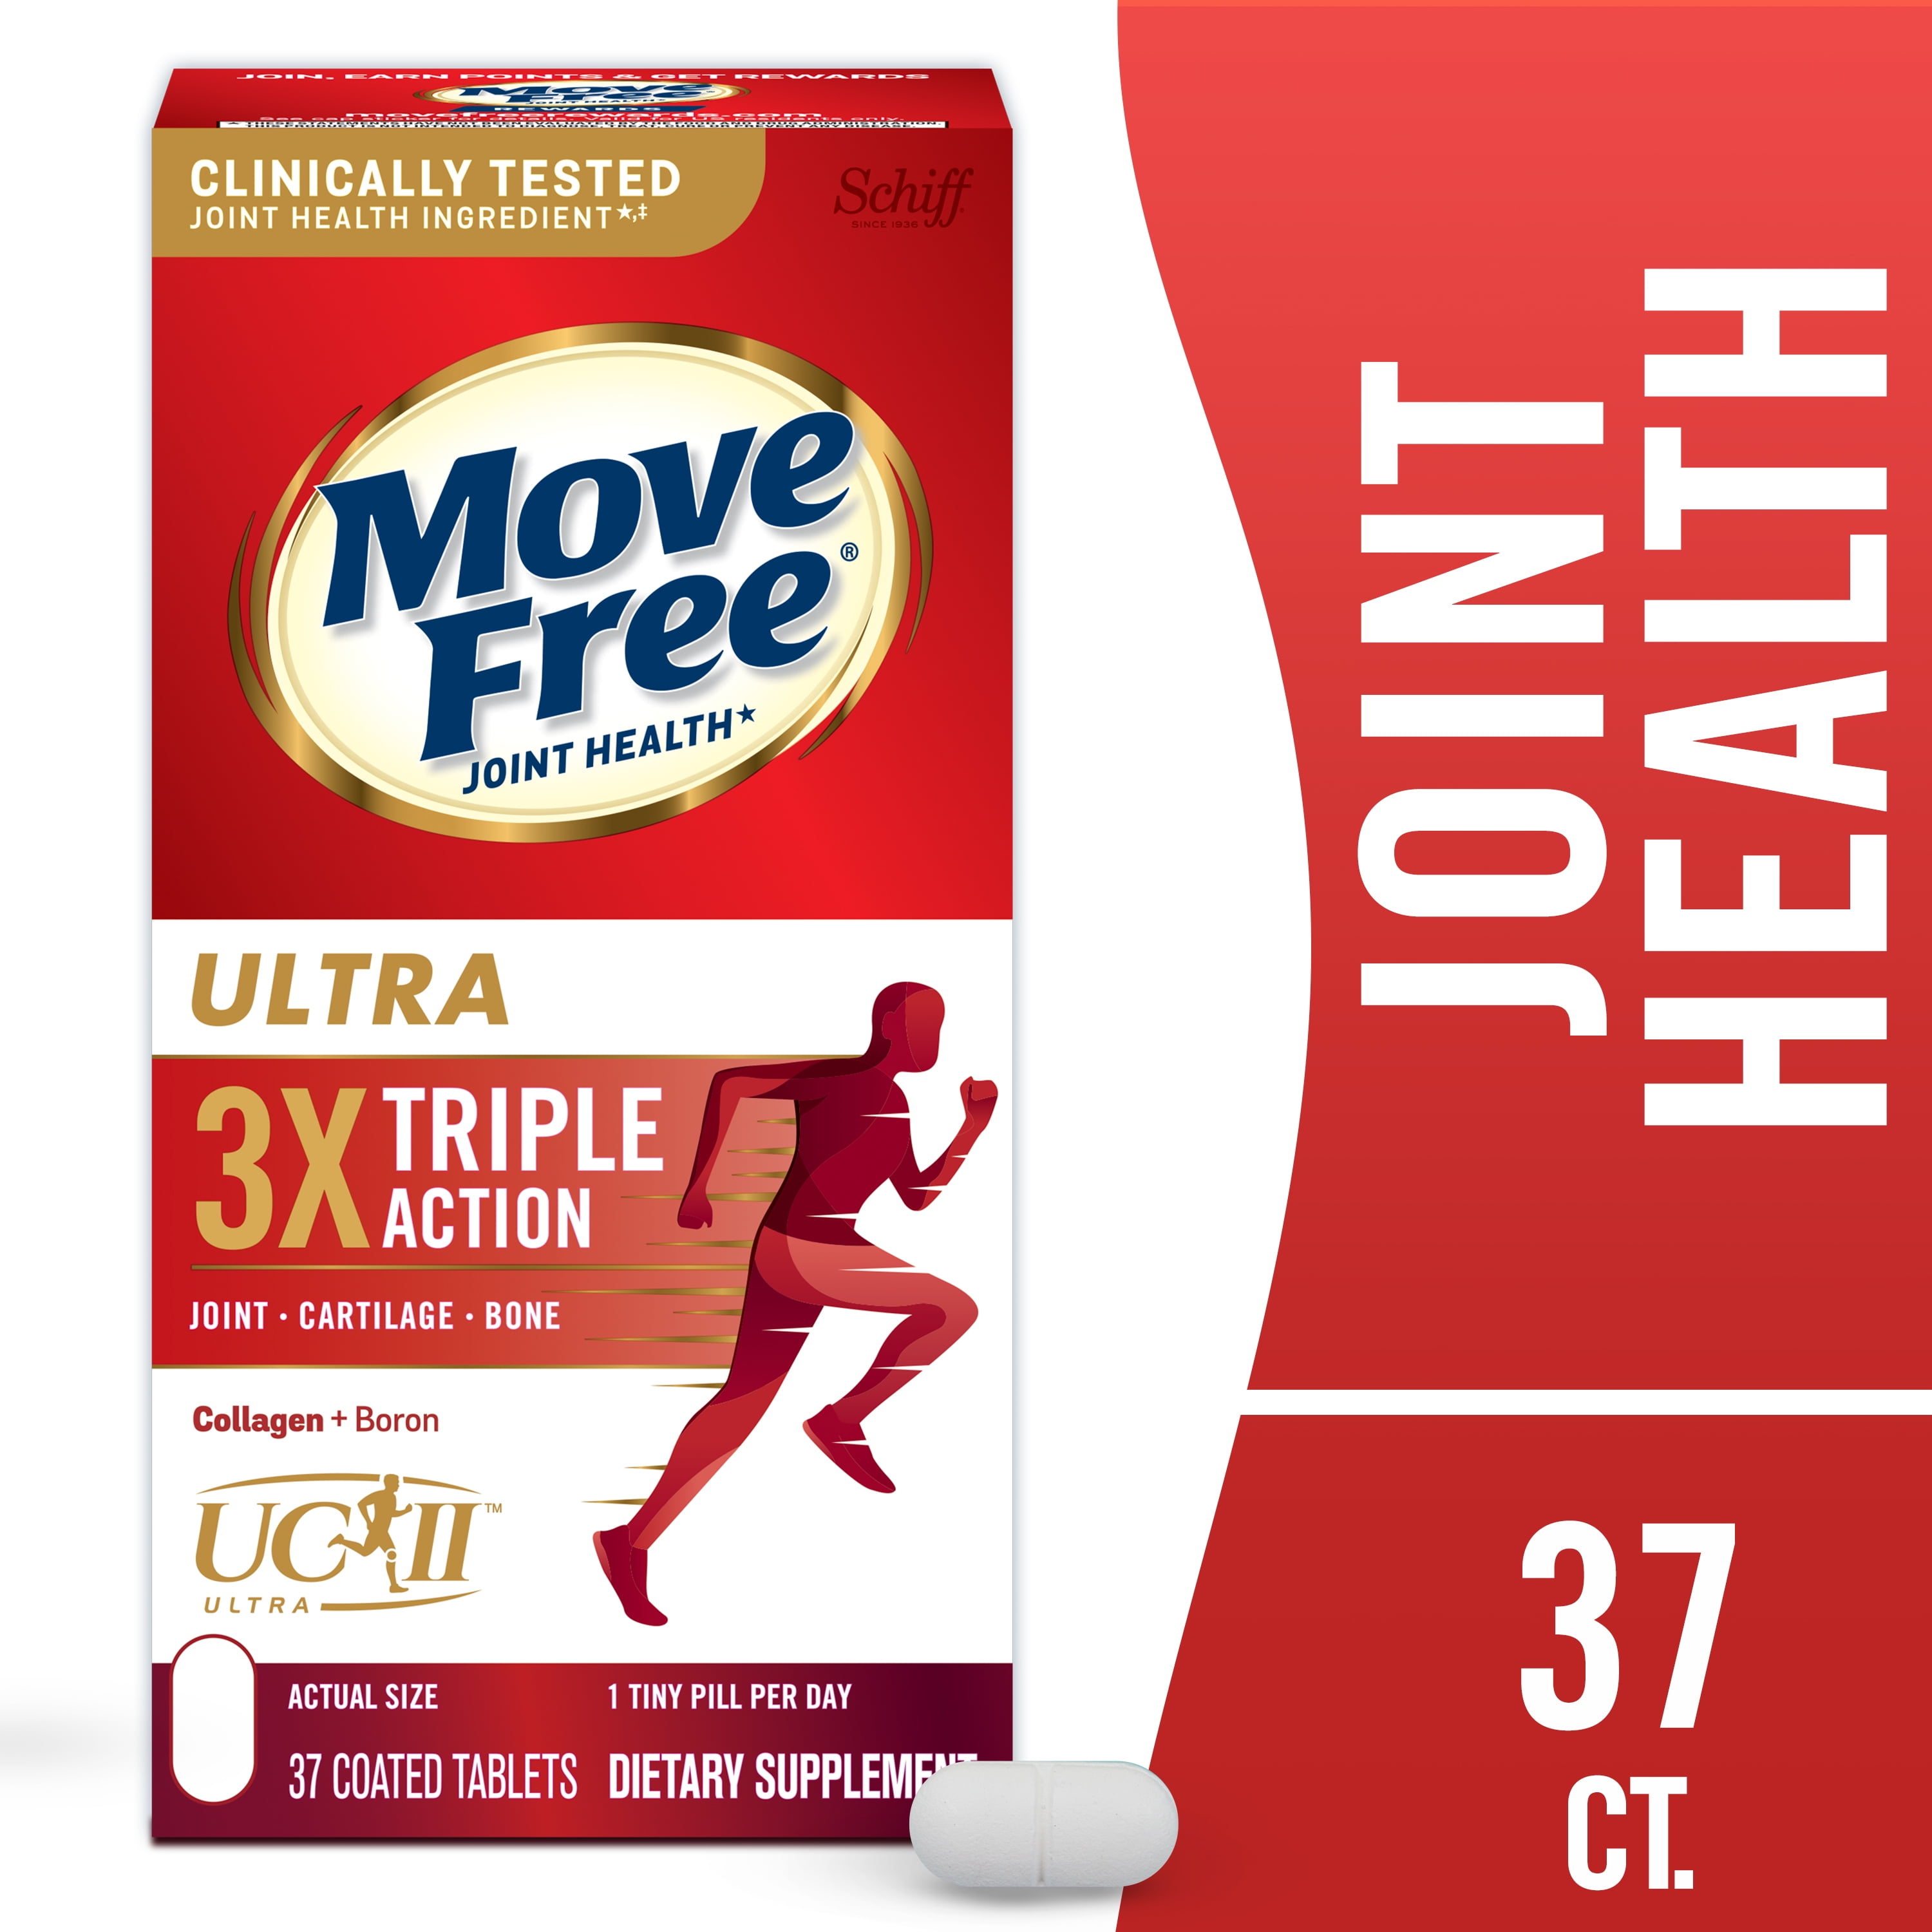 Move Free Ultra Type II Collagen + Boron + HA, Coated Tablets - 37 tablets